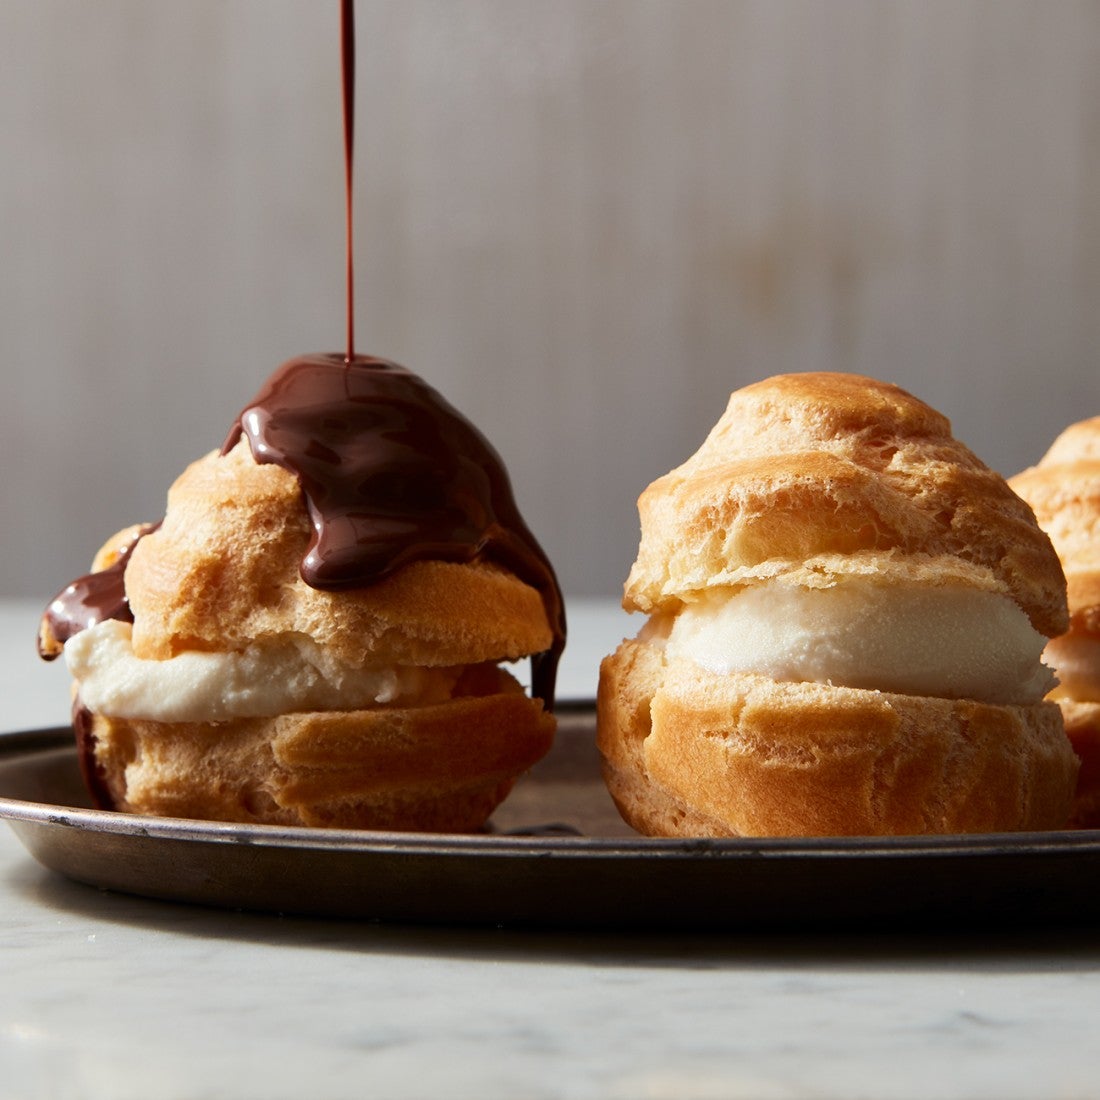 Filled and iced cream puffs